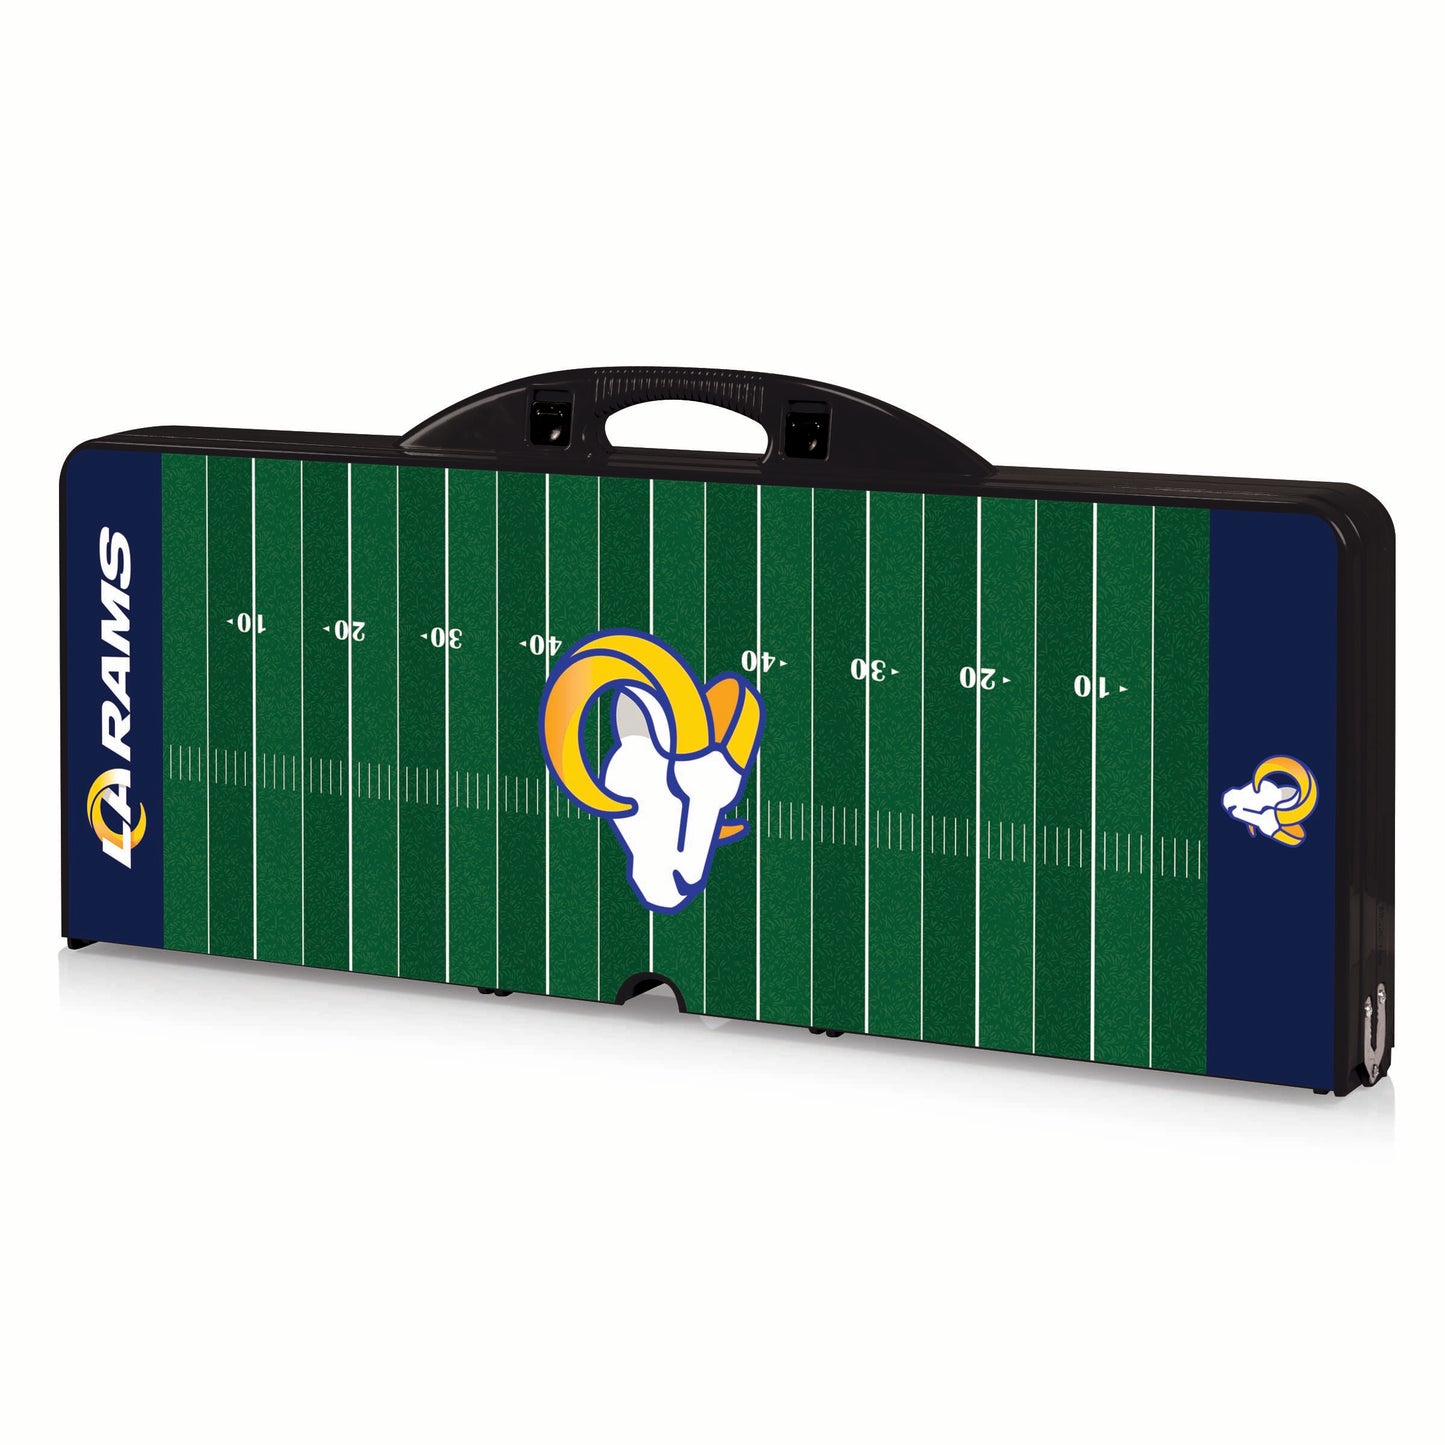 Los Angeles Rams - Picnic Table Portable Folding Table with Seats - Football Field Style